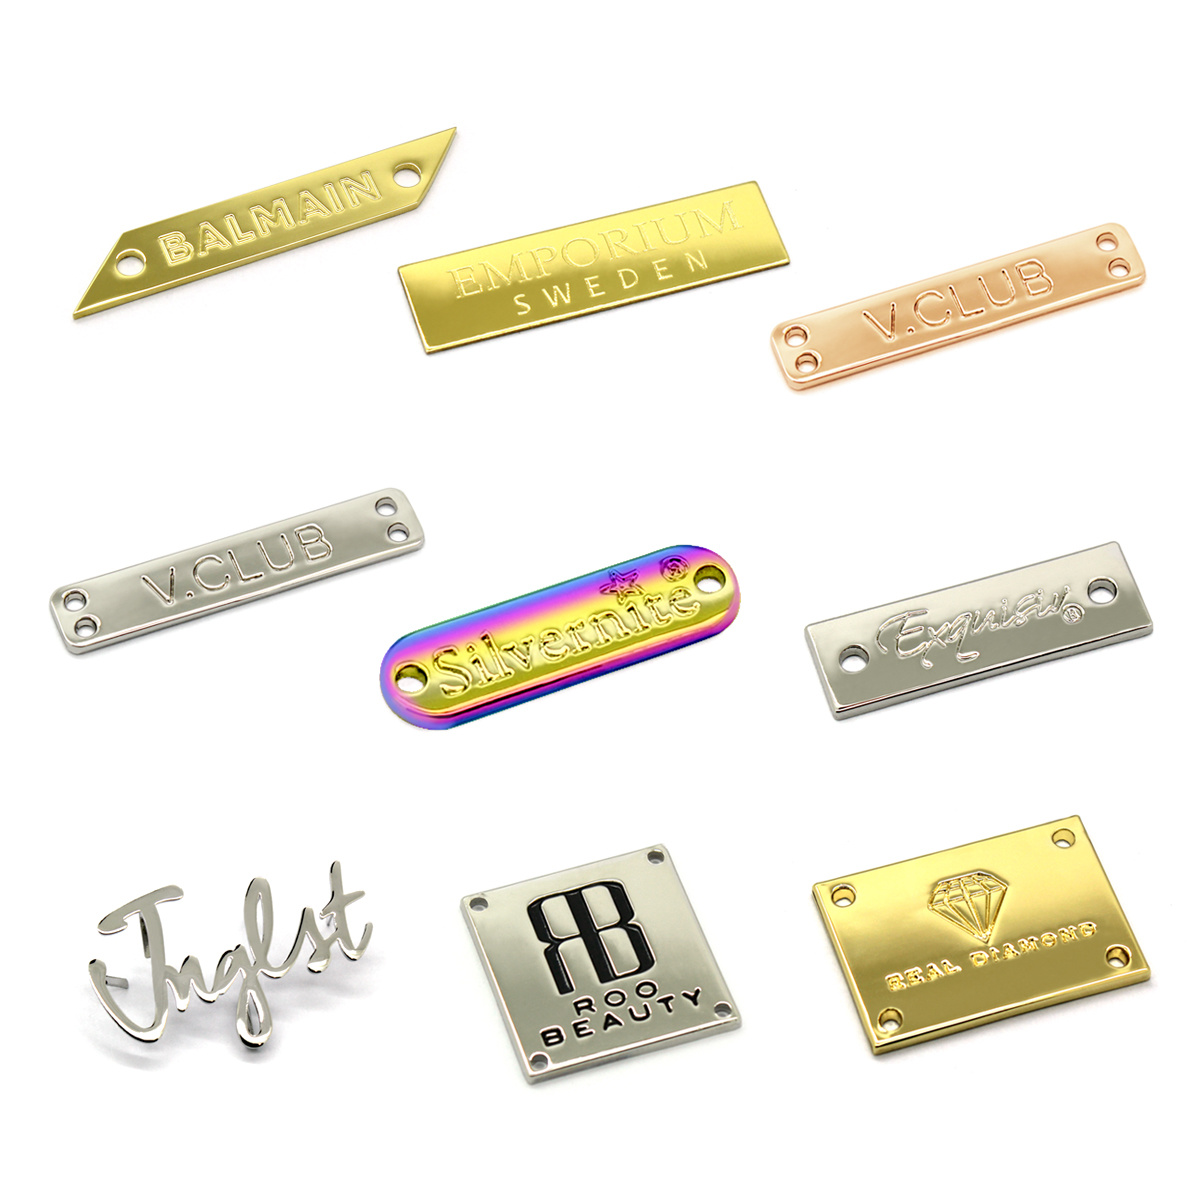 Branding Your Business With Custom Metal Name Tags